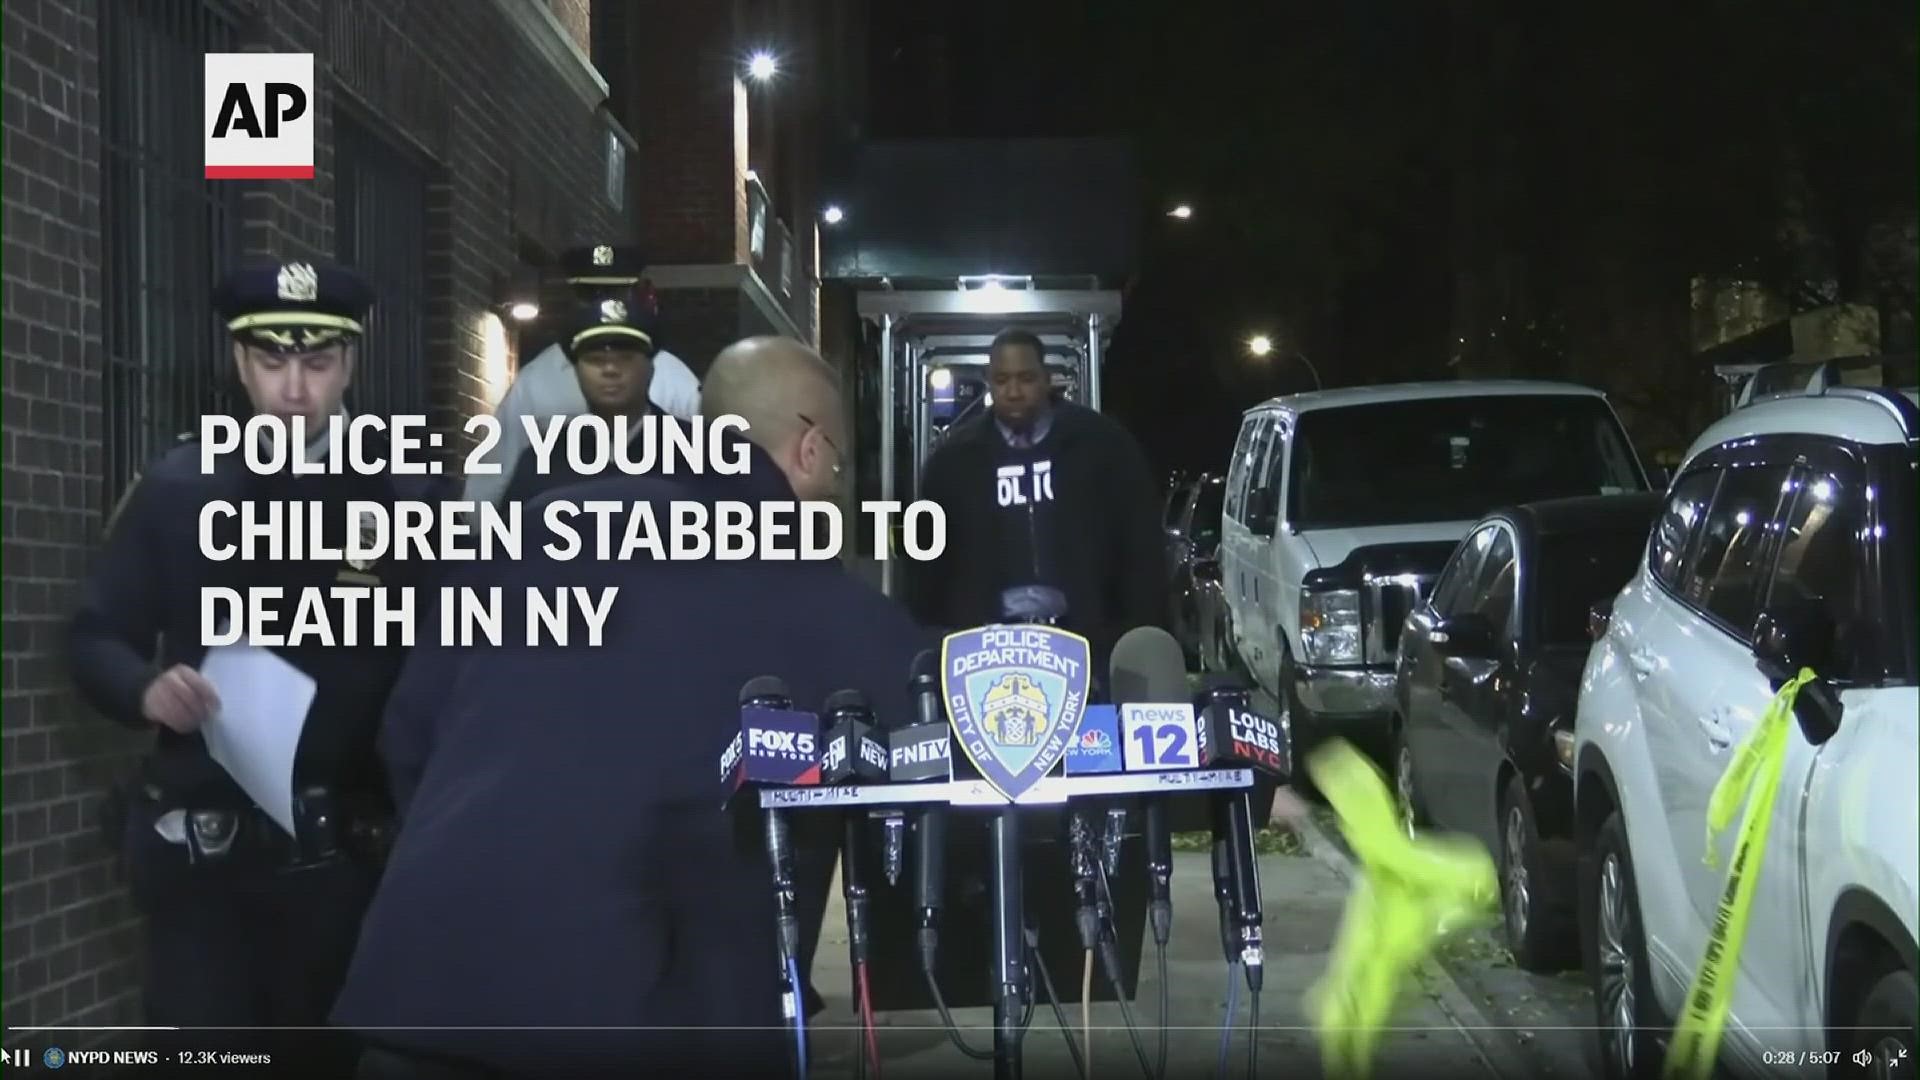 Police say two small children died of stab wounds after their mother was taken into custody for observation in New York City.